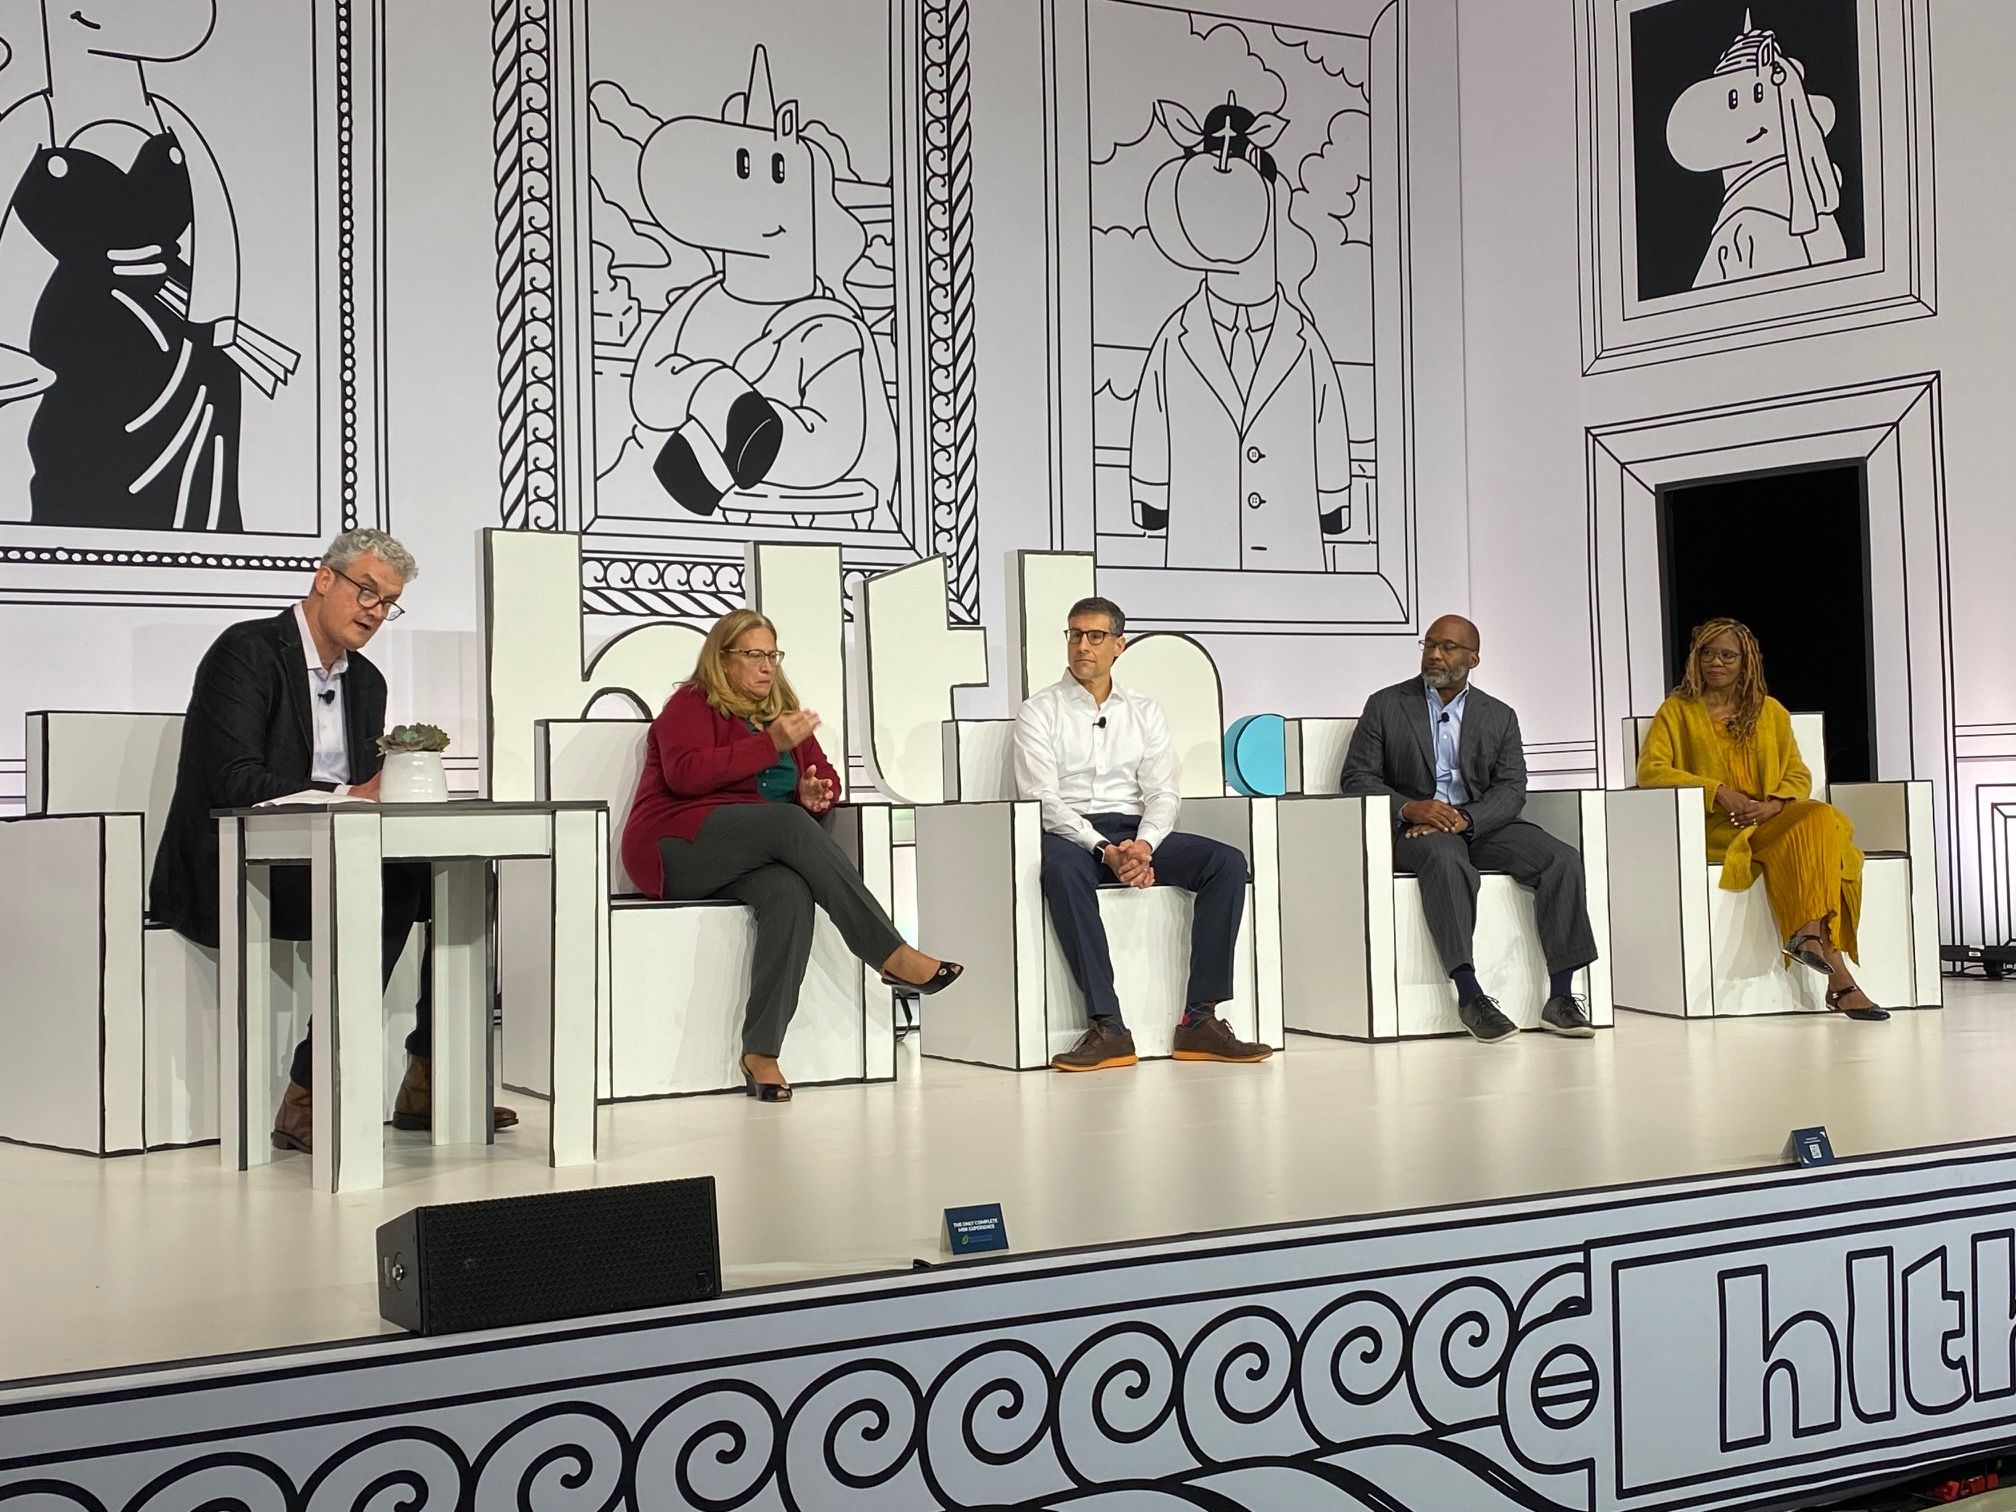 From left, moderator John MacPhee leads a discussion of digital solutions for mental health with Virna Little, Andy Haim, Vindell Washington, and Patrice A. Harris. The discussion took place Nov. 16 at the HLTH Conference in Las Vegas. (Photo: Ron Southwick)